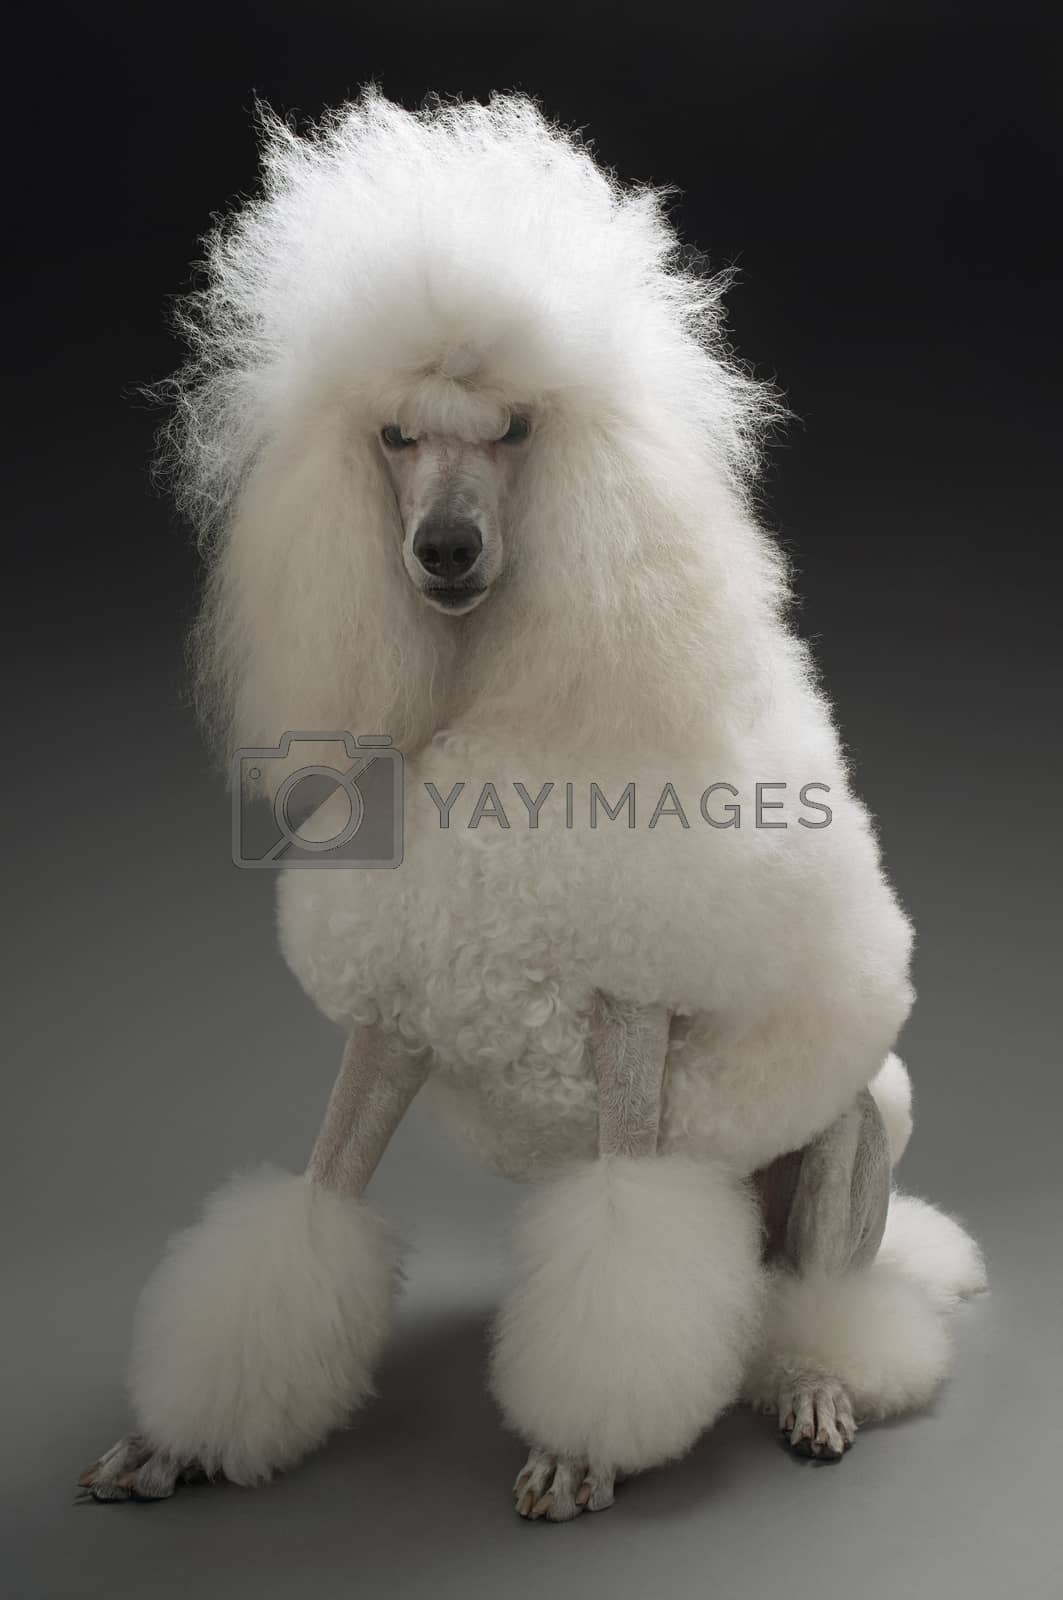 Royalty free image of White Poodle on grey background by moodboard